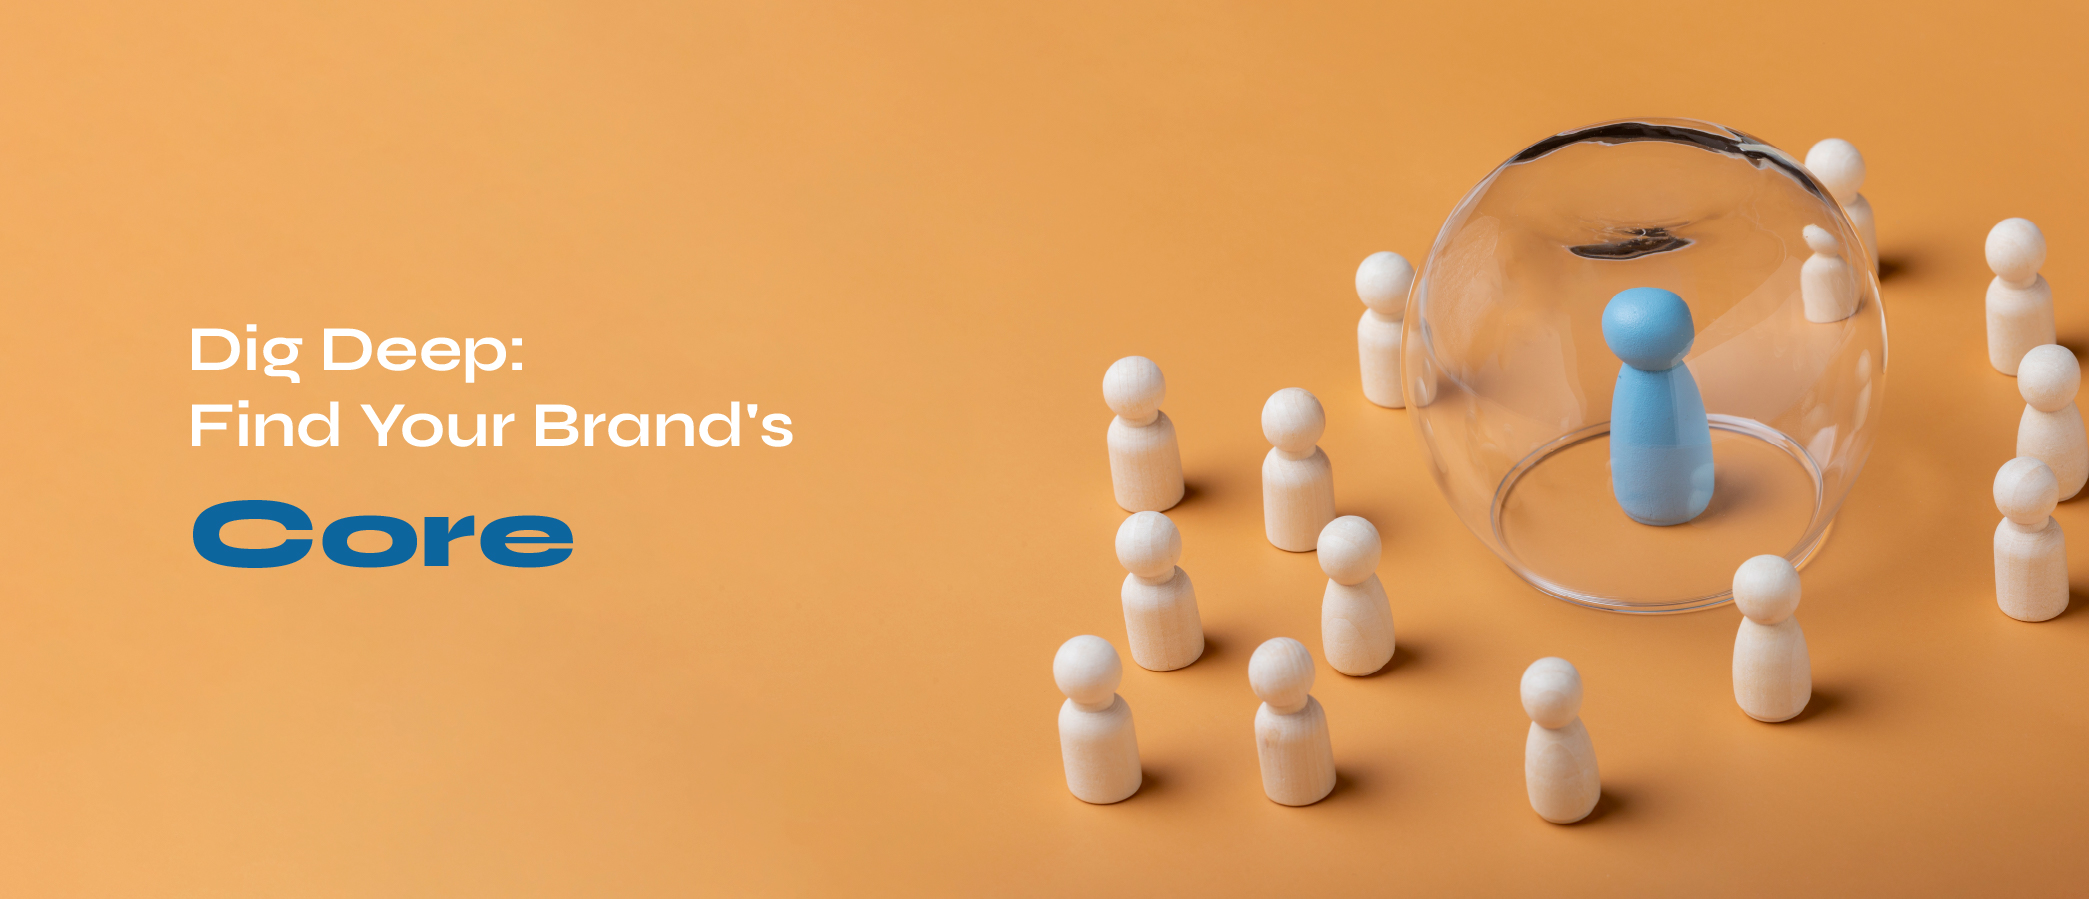  Dig Deep: Find Your Brand's Core